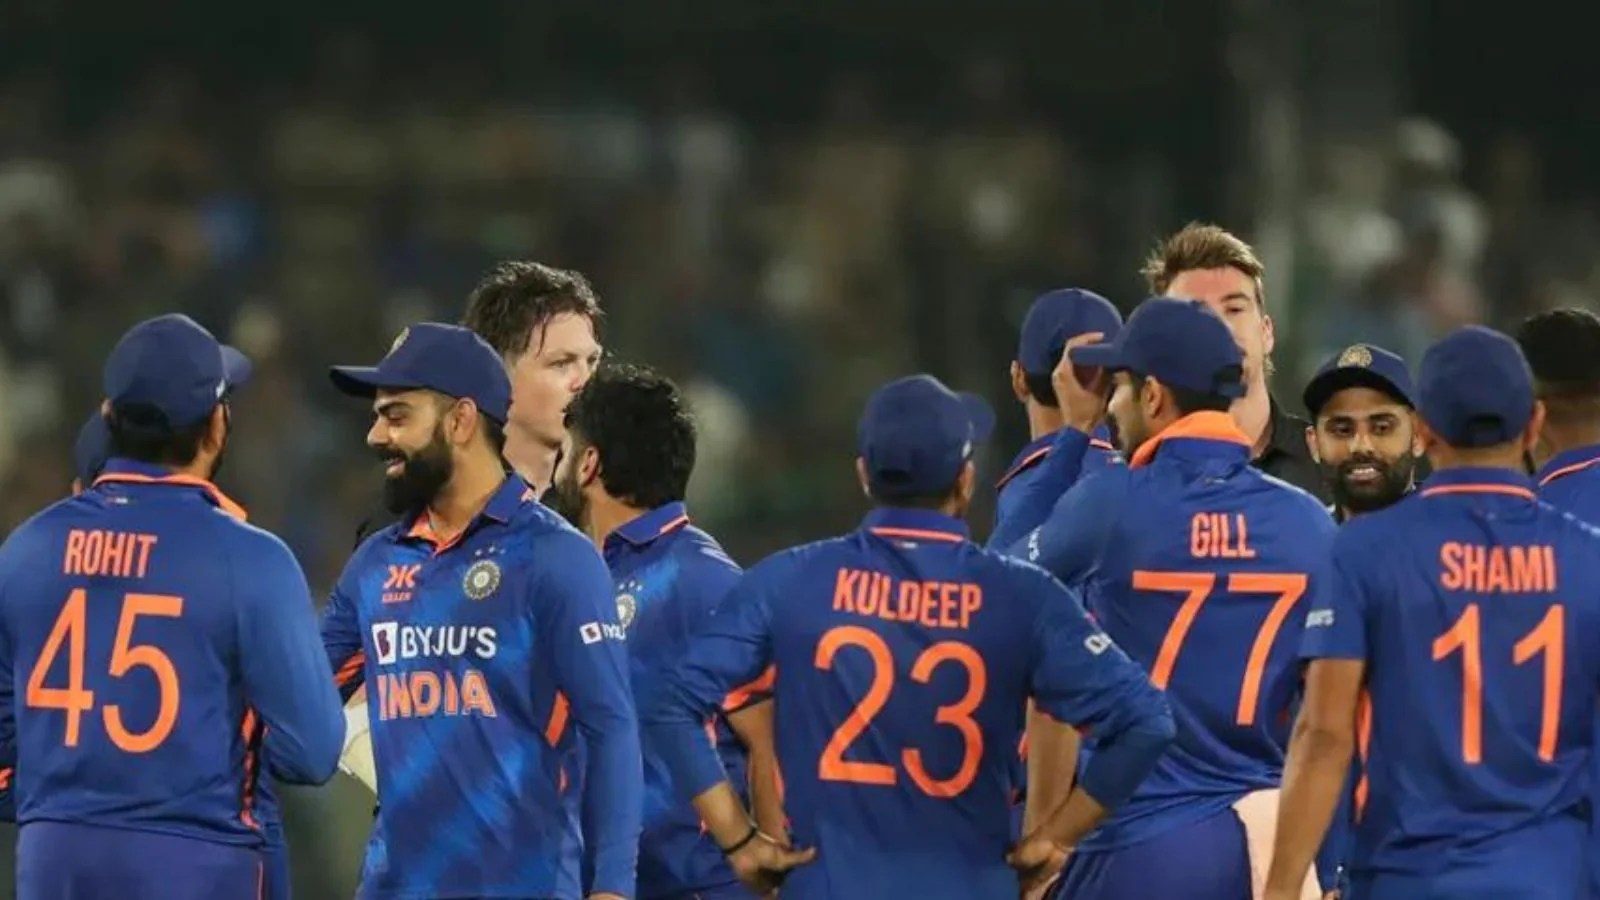 IND vs NZ LIVE: Despite series in pocket, 3 Reasons why winning 3rd ODI in Indore is critical for Rohit Sharma led TEAM India: Follow INDIA vs NewZealand LIVE, IND vs NZ 3RD ODI Indore, Team India World No 1 ODI